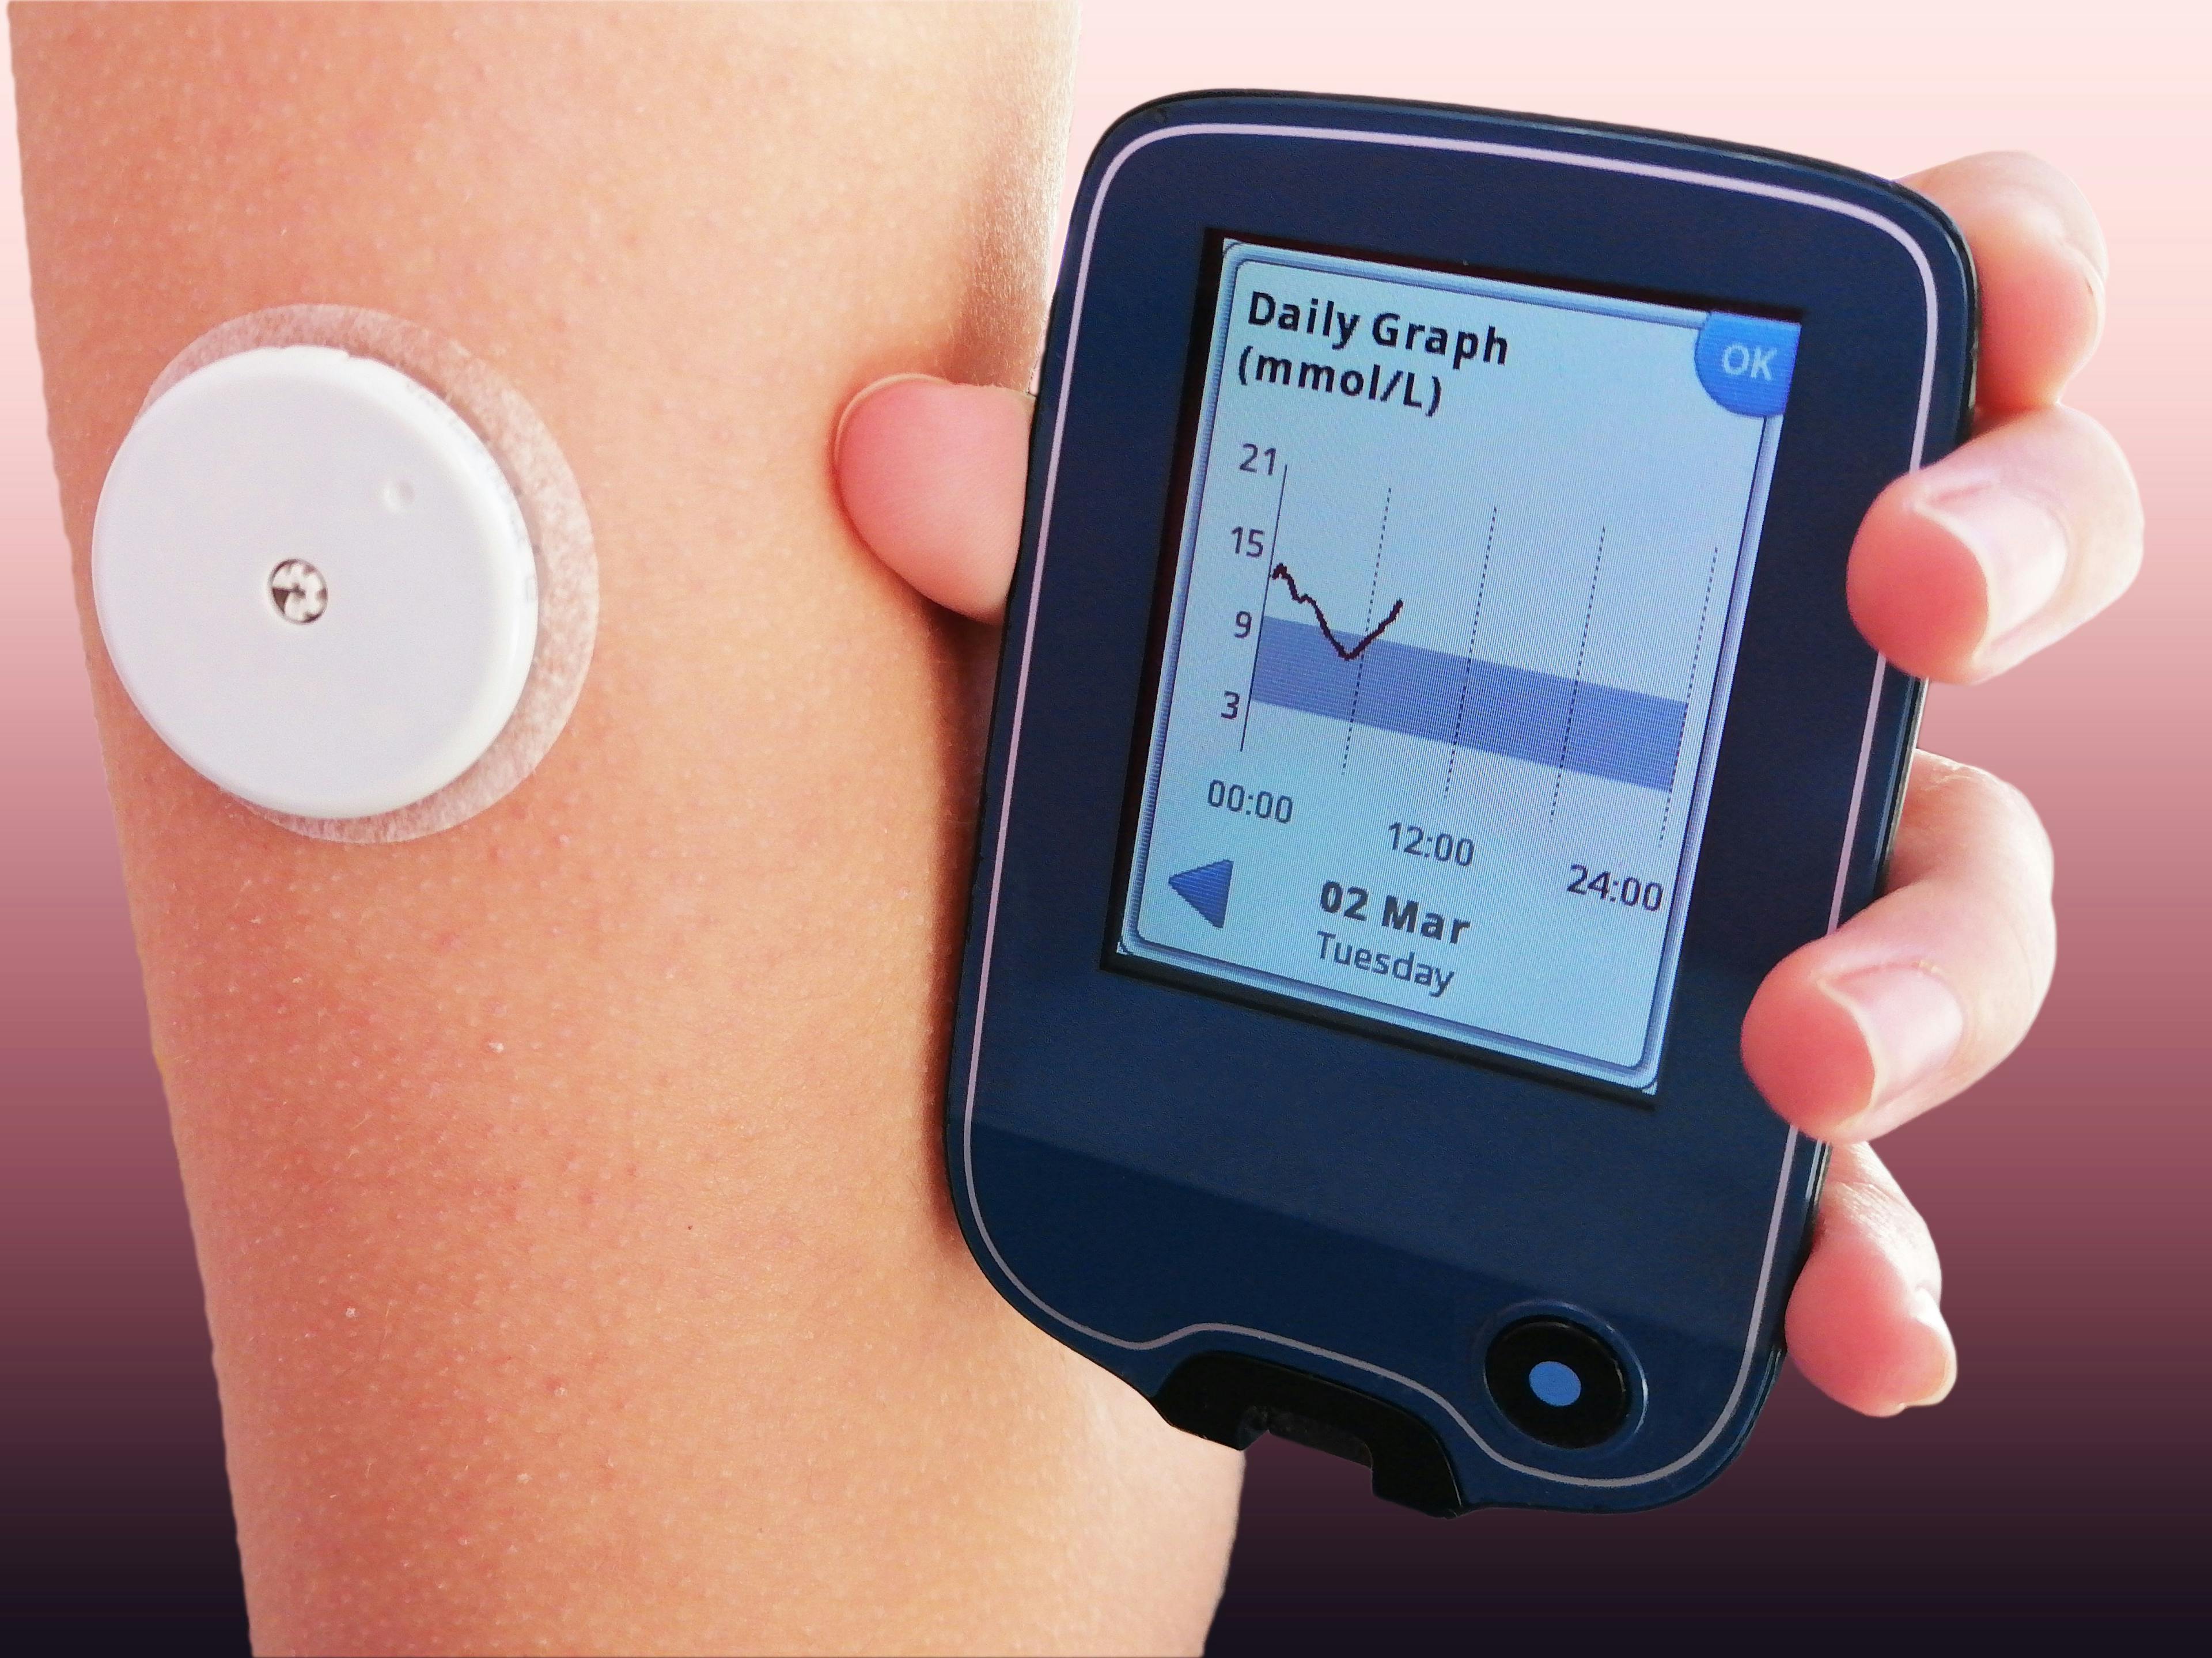 Continuous Glucose Monitors May Help Alleviate Care Burden for Parents of Young Children with T1D